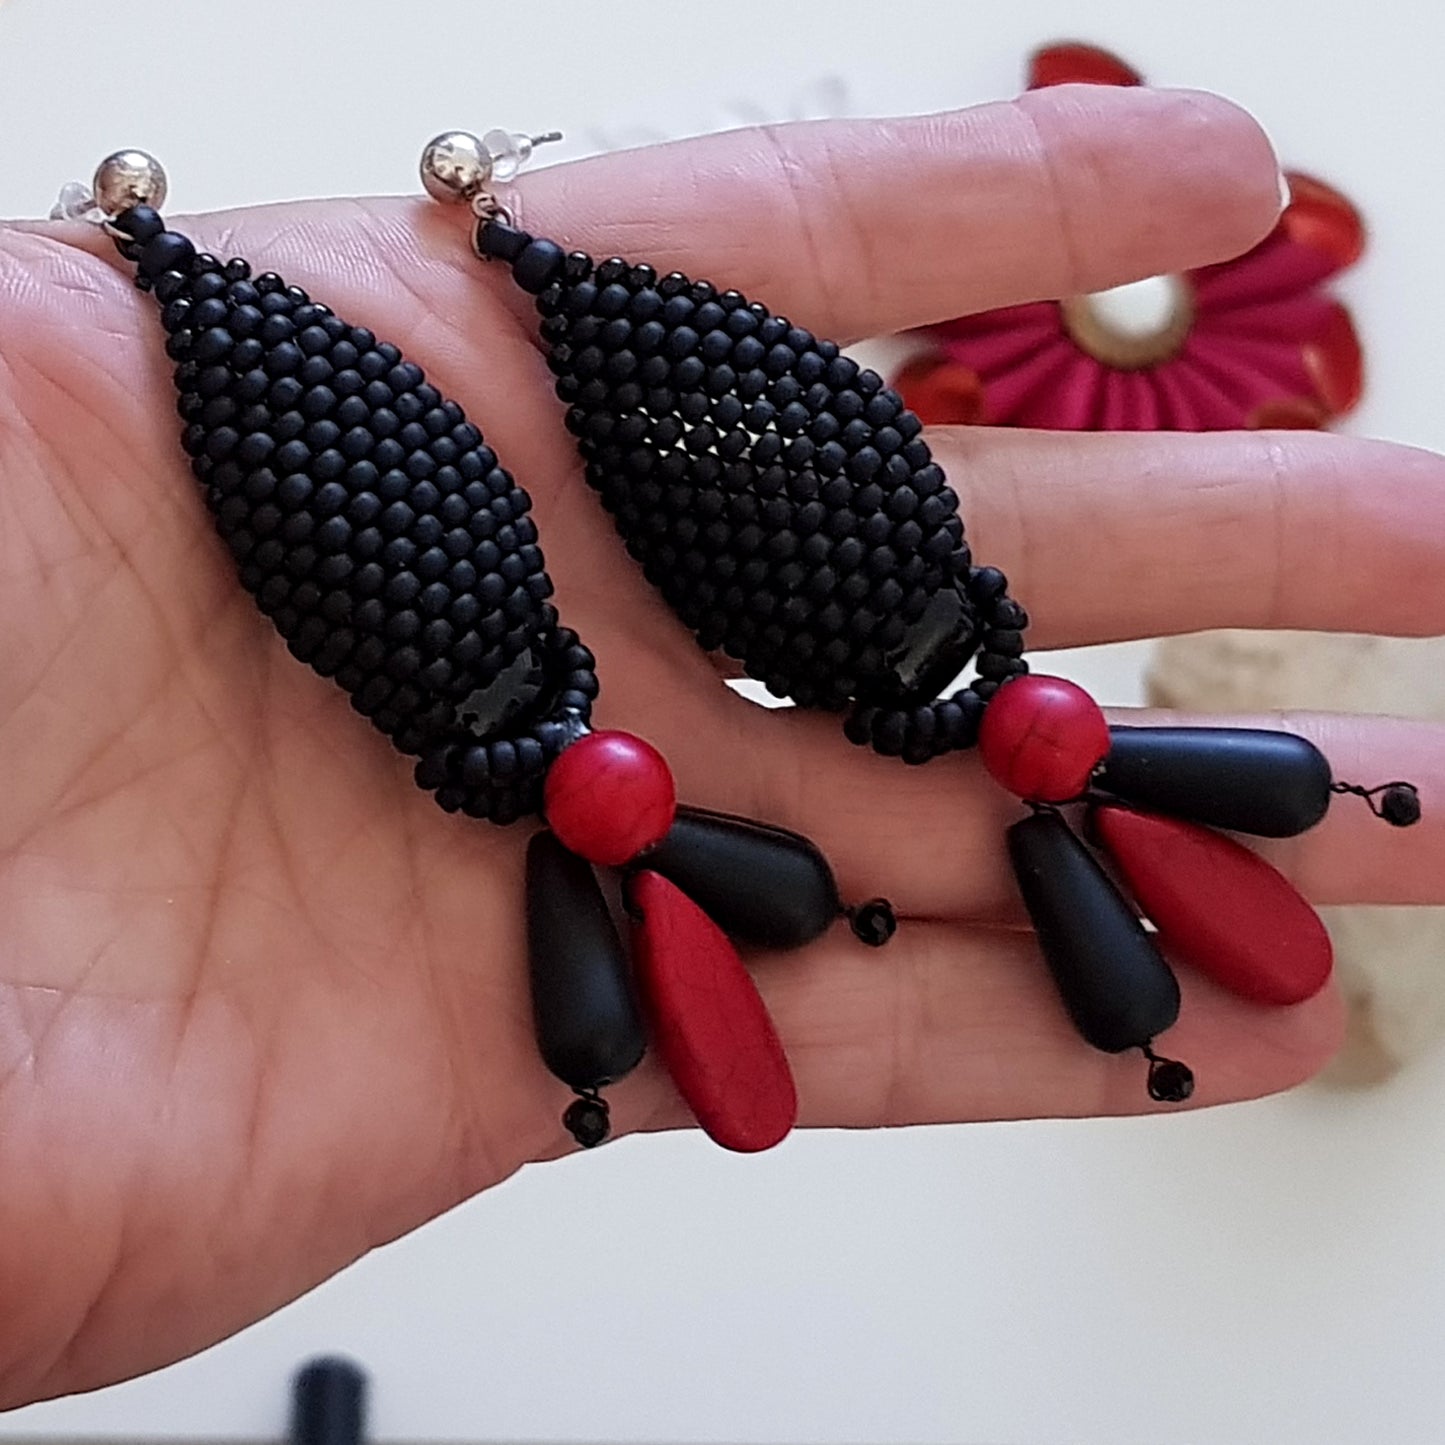 KTC-380 Stunning Statement Earrings - Black Agate - Red Howlite - Free Shipping - Kalitheo Jewellery